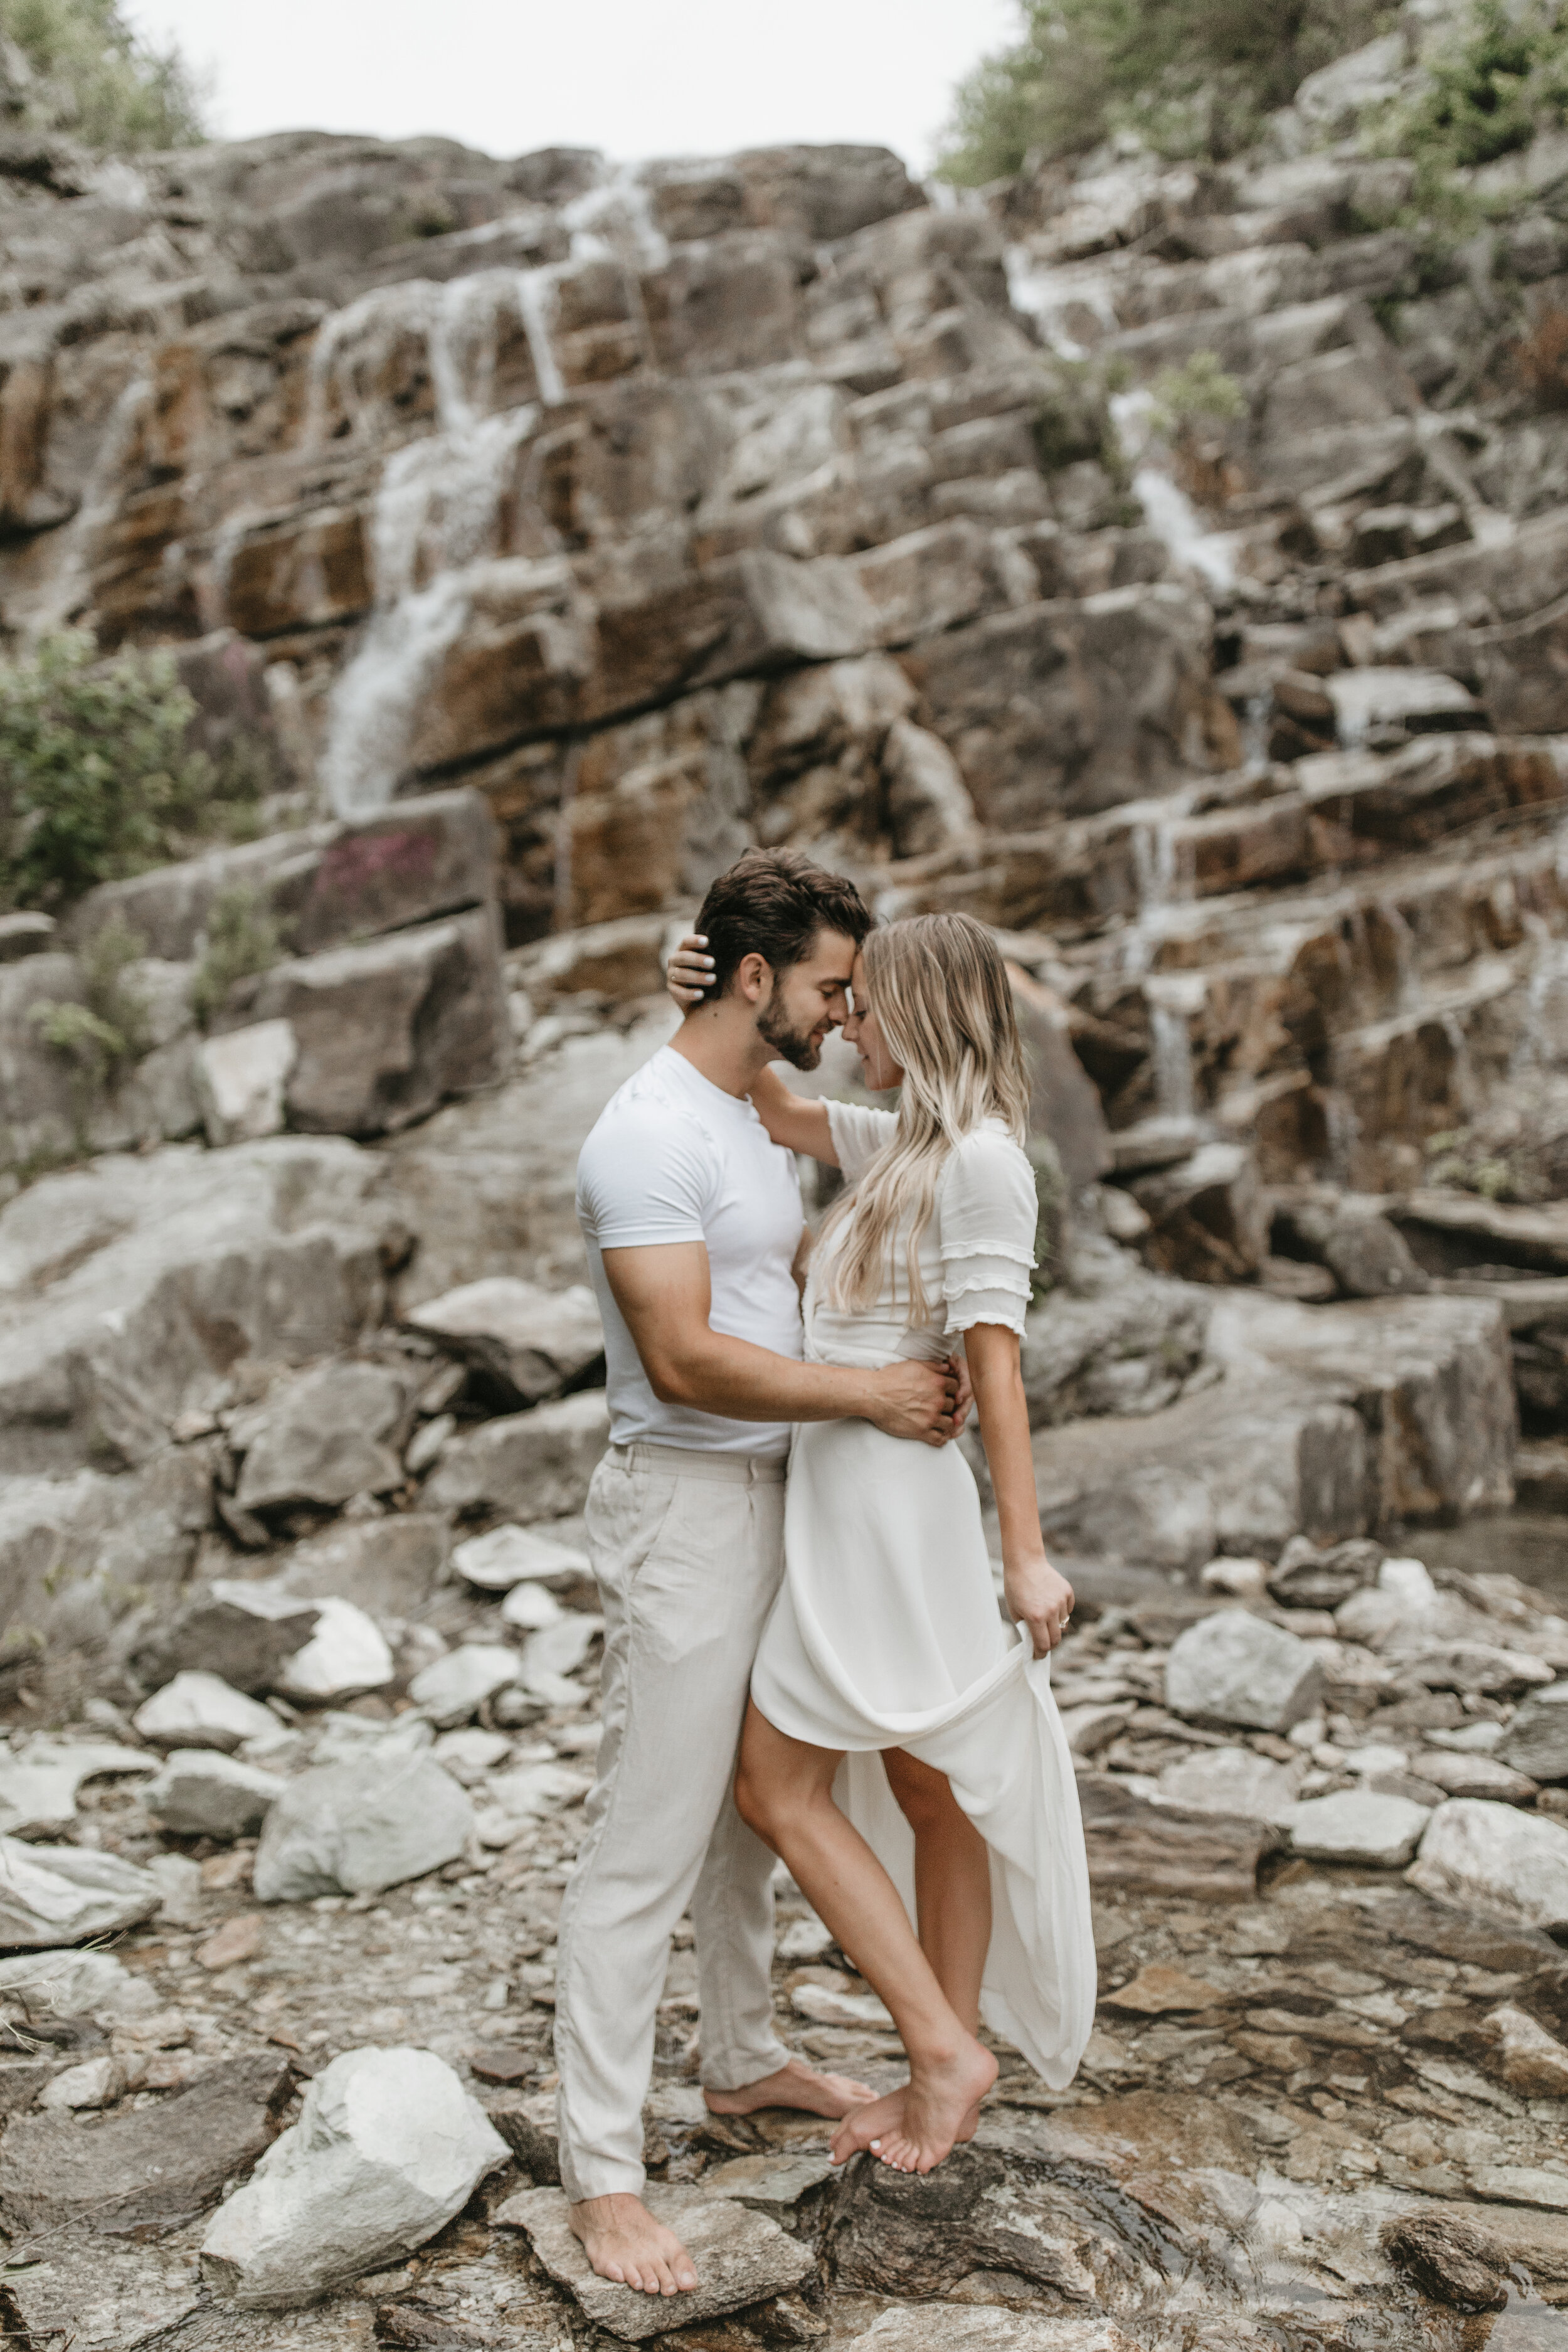 Nicole-Daacke-Photography-michaux-state-forest-elopement-adventure-engagement-session-pennsylvania-elopement-pa-elopement-photographer-gettysburg-photographer-state-park-elopement-engagement-session-pennsylvania-waterfall-168.jpg